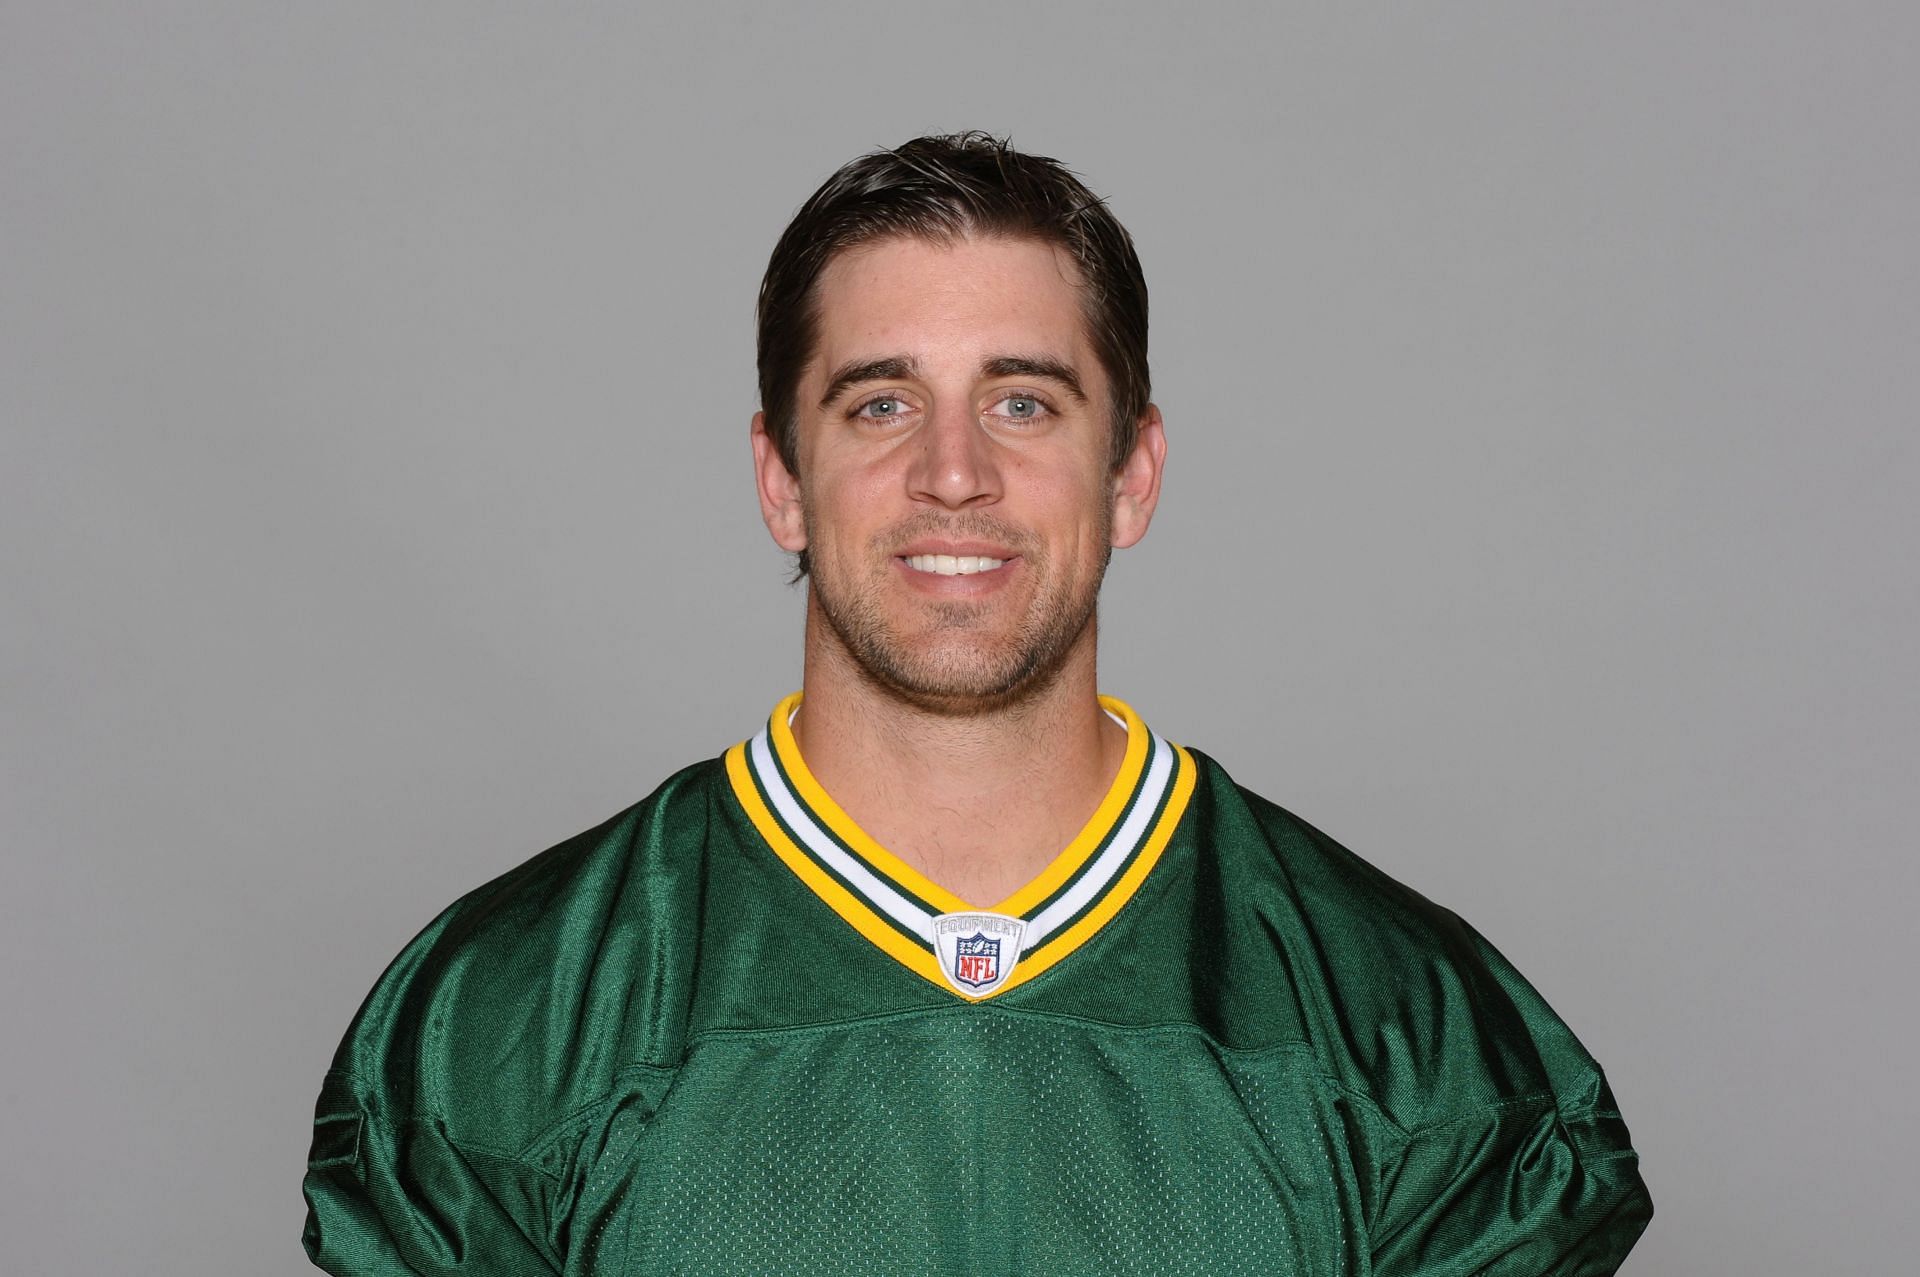 Green Bay Packers quarterback Aaron Rodgers in 2010